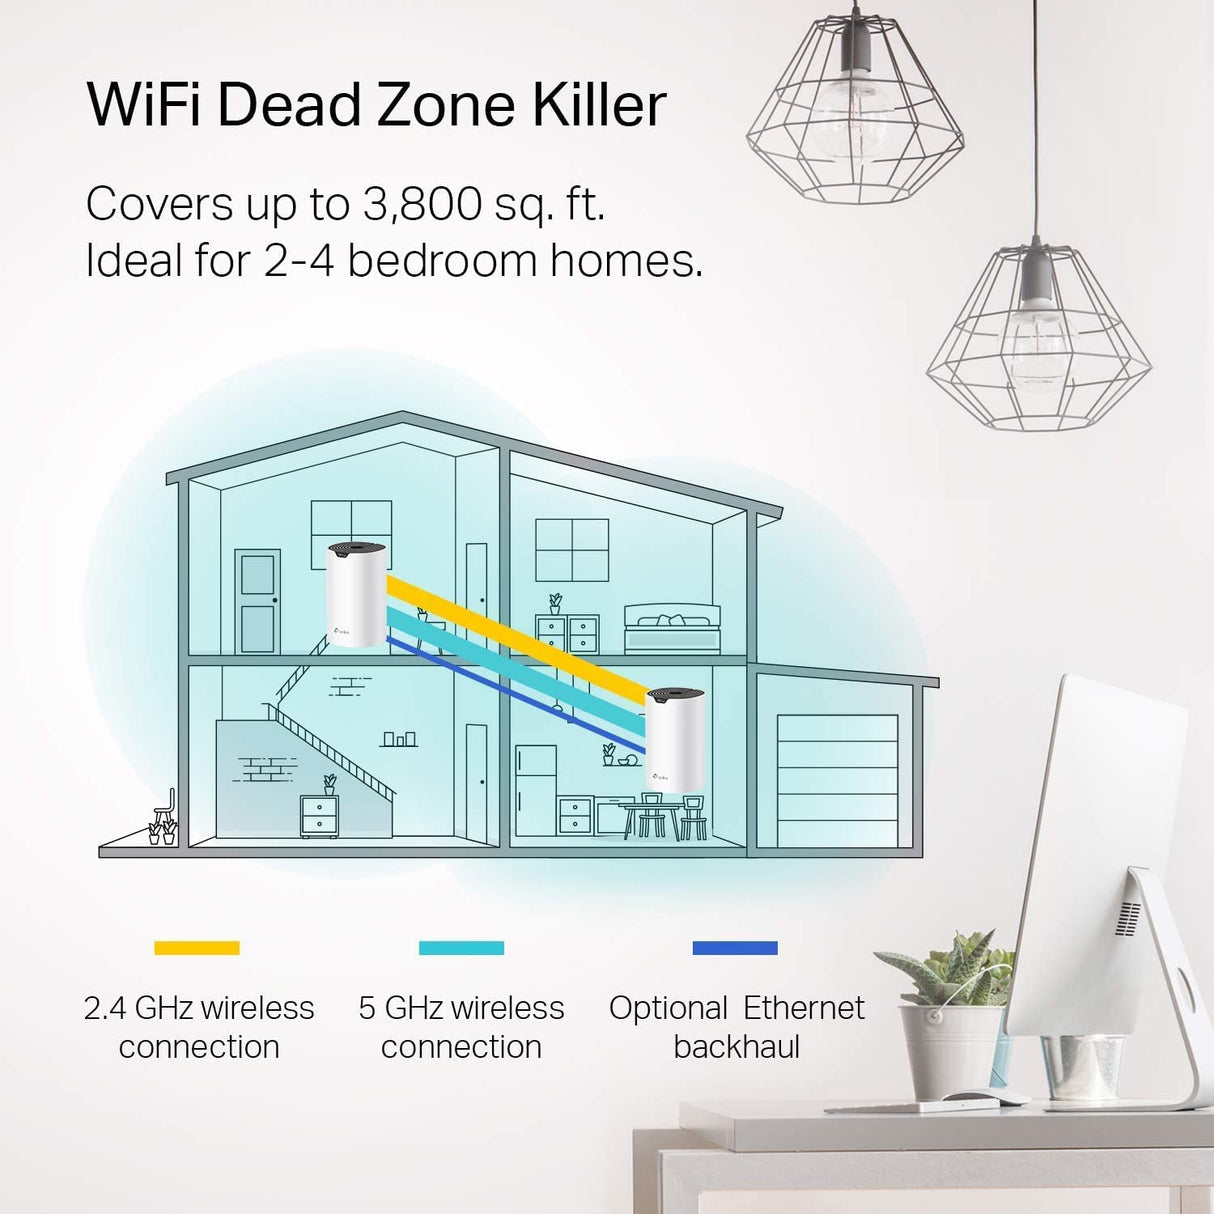 TP-Link Deco Whole Home Mesh WiFi System (Deco M4) – Up to 3,800 Sq. Ft. Coverage, WiFi Router and Extender Replacement, Parental Controls, 2-Pack AC1200